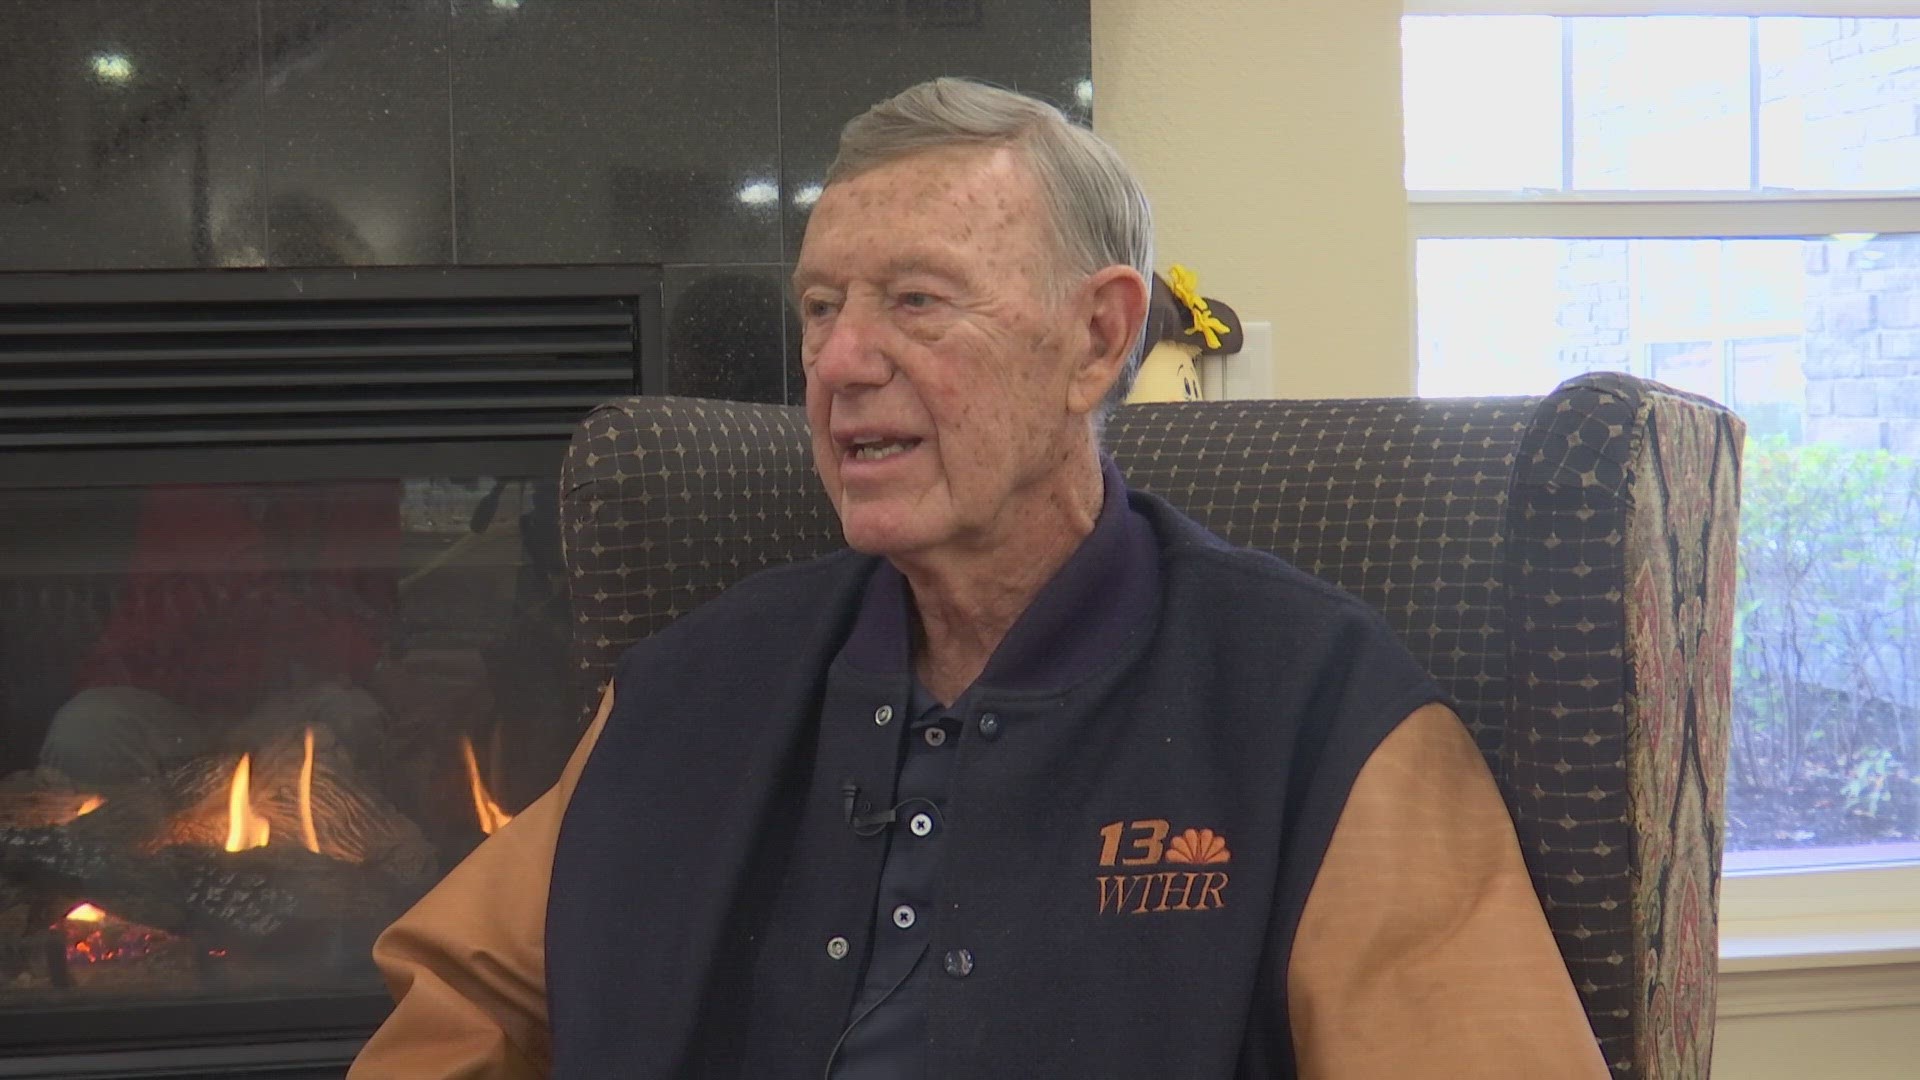 13News reporter Rich Nye sat down with retired 13Sports director Don Hein and reflected on coach Bob Knight's legacy.